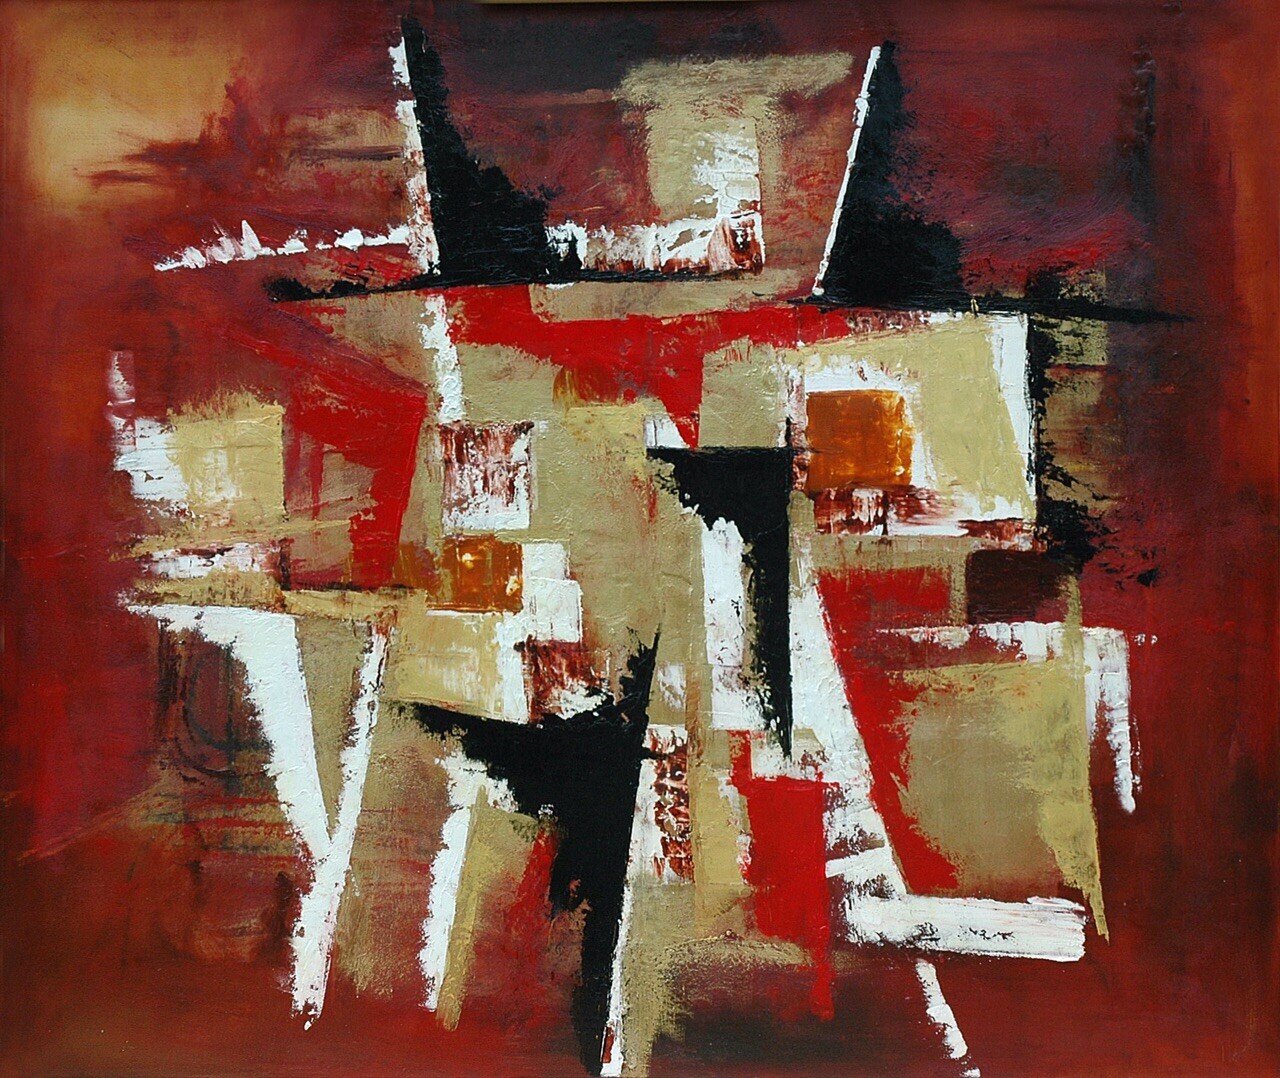 Crocifissione 100x120 Oil Acrylics and Plaster on Canvas